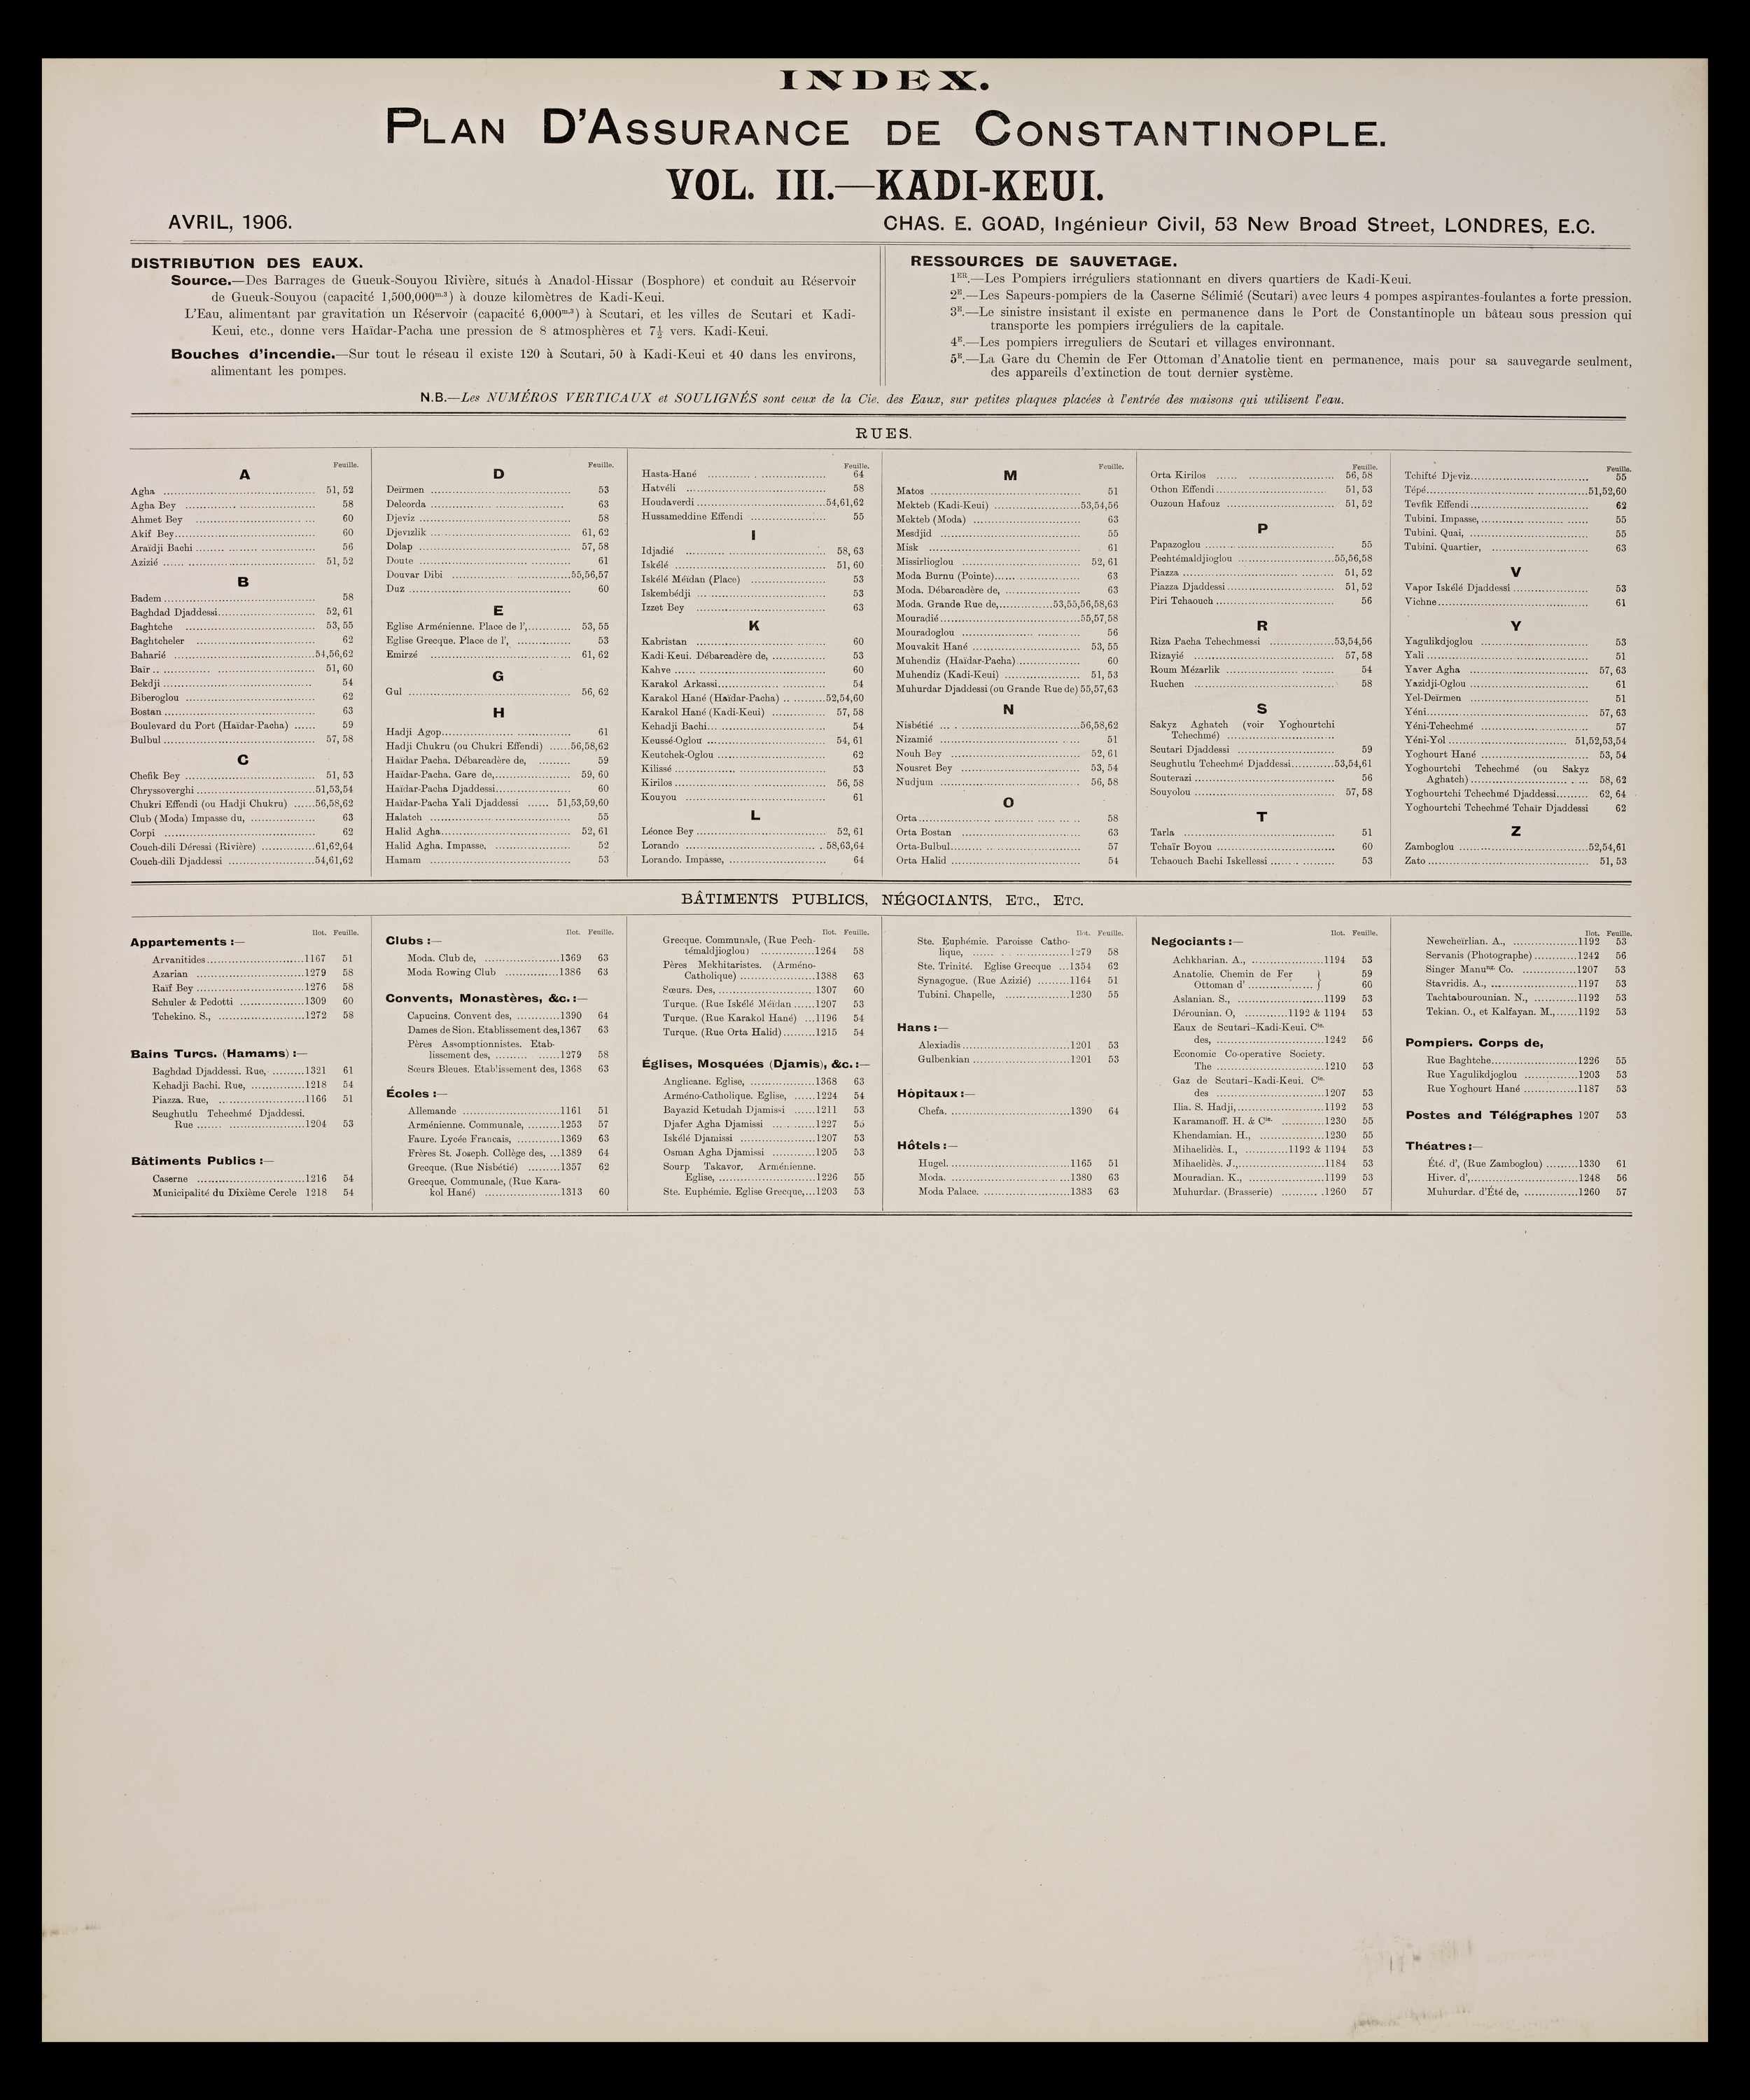 Charles E. Goad - <span style="color: rgb(1, 1, 1); line-height: 16px;">A sheet from the&nbsp;</span><span style="color: rgb(1, 1, 1); line-height: 16px; font-style: italic;">Plan d'Assurance de Constantinople&nbsp;</span><span style="color: rgb(1, 1, 1); line-height: 16px;">(Insurance Plan of Constantinople)</span><span style="color: rgb(1, 1, 1); line-height: 16px;">. The complete set of plans is available on&nbsp;</span><a href="http://archnet.org/publications/10288" target="_blank" data-bypass="true" style="line-height: 16px;">Archnet</a><span style="color: rgb(1, 1, 1); line-height: 16px;">.</span>